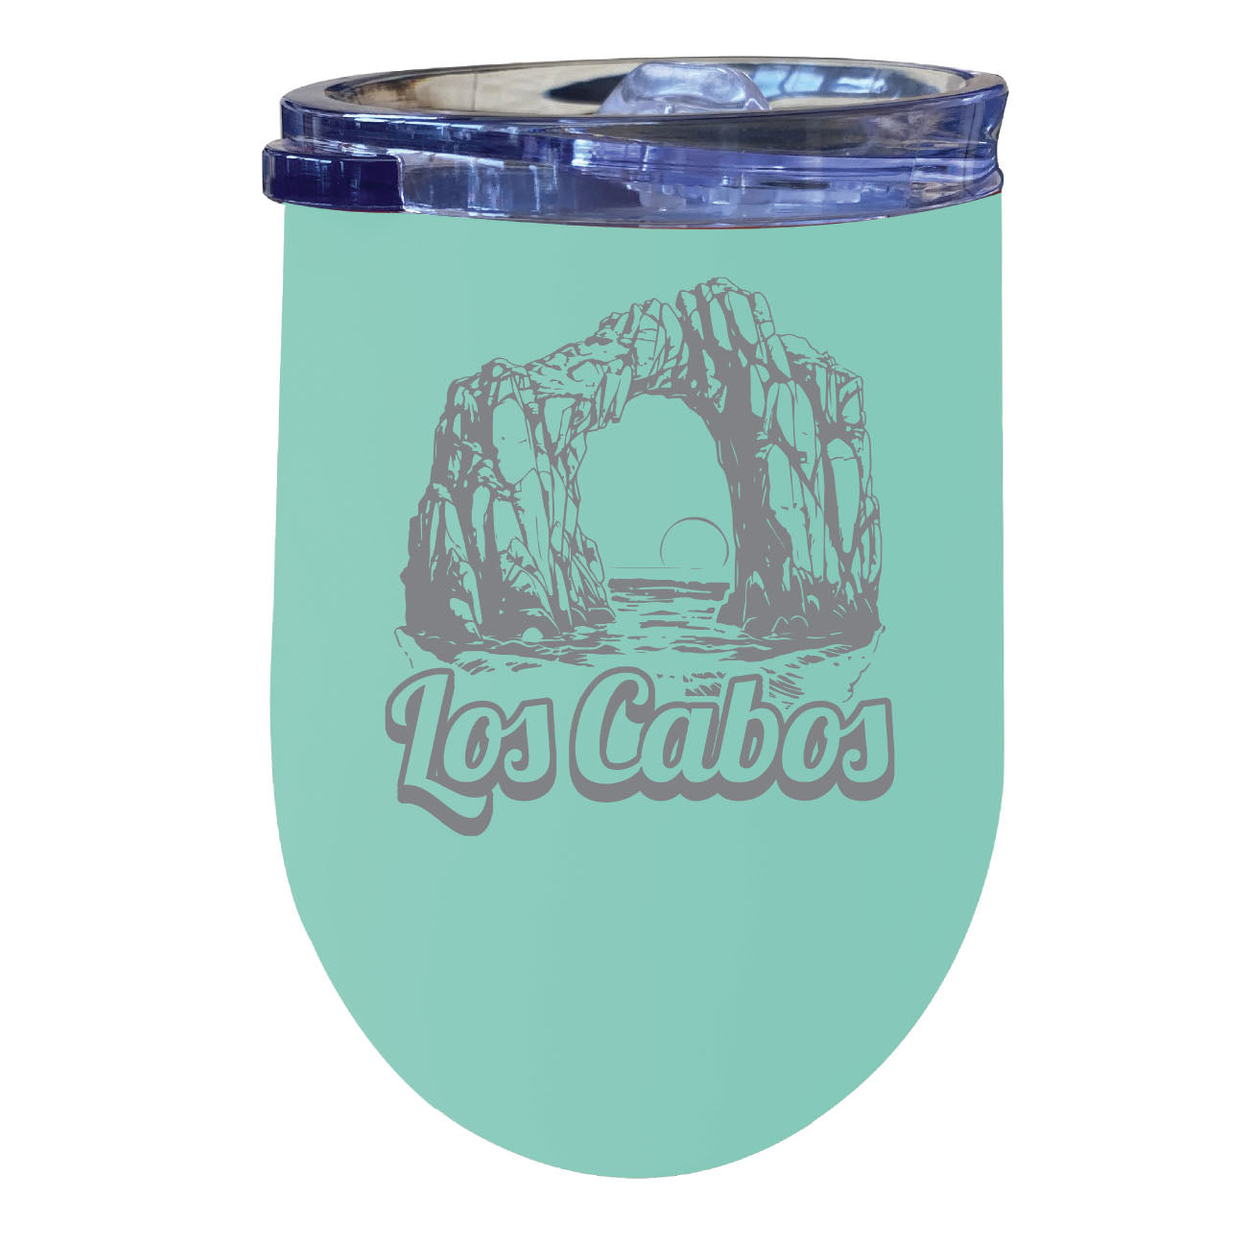 Los Cabos Mexico Souvenir 12 Oz Engraved Insulated Wine Stainless Steel Tumbler - Seafoam,,2-Pack